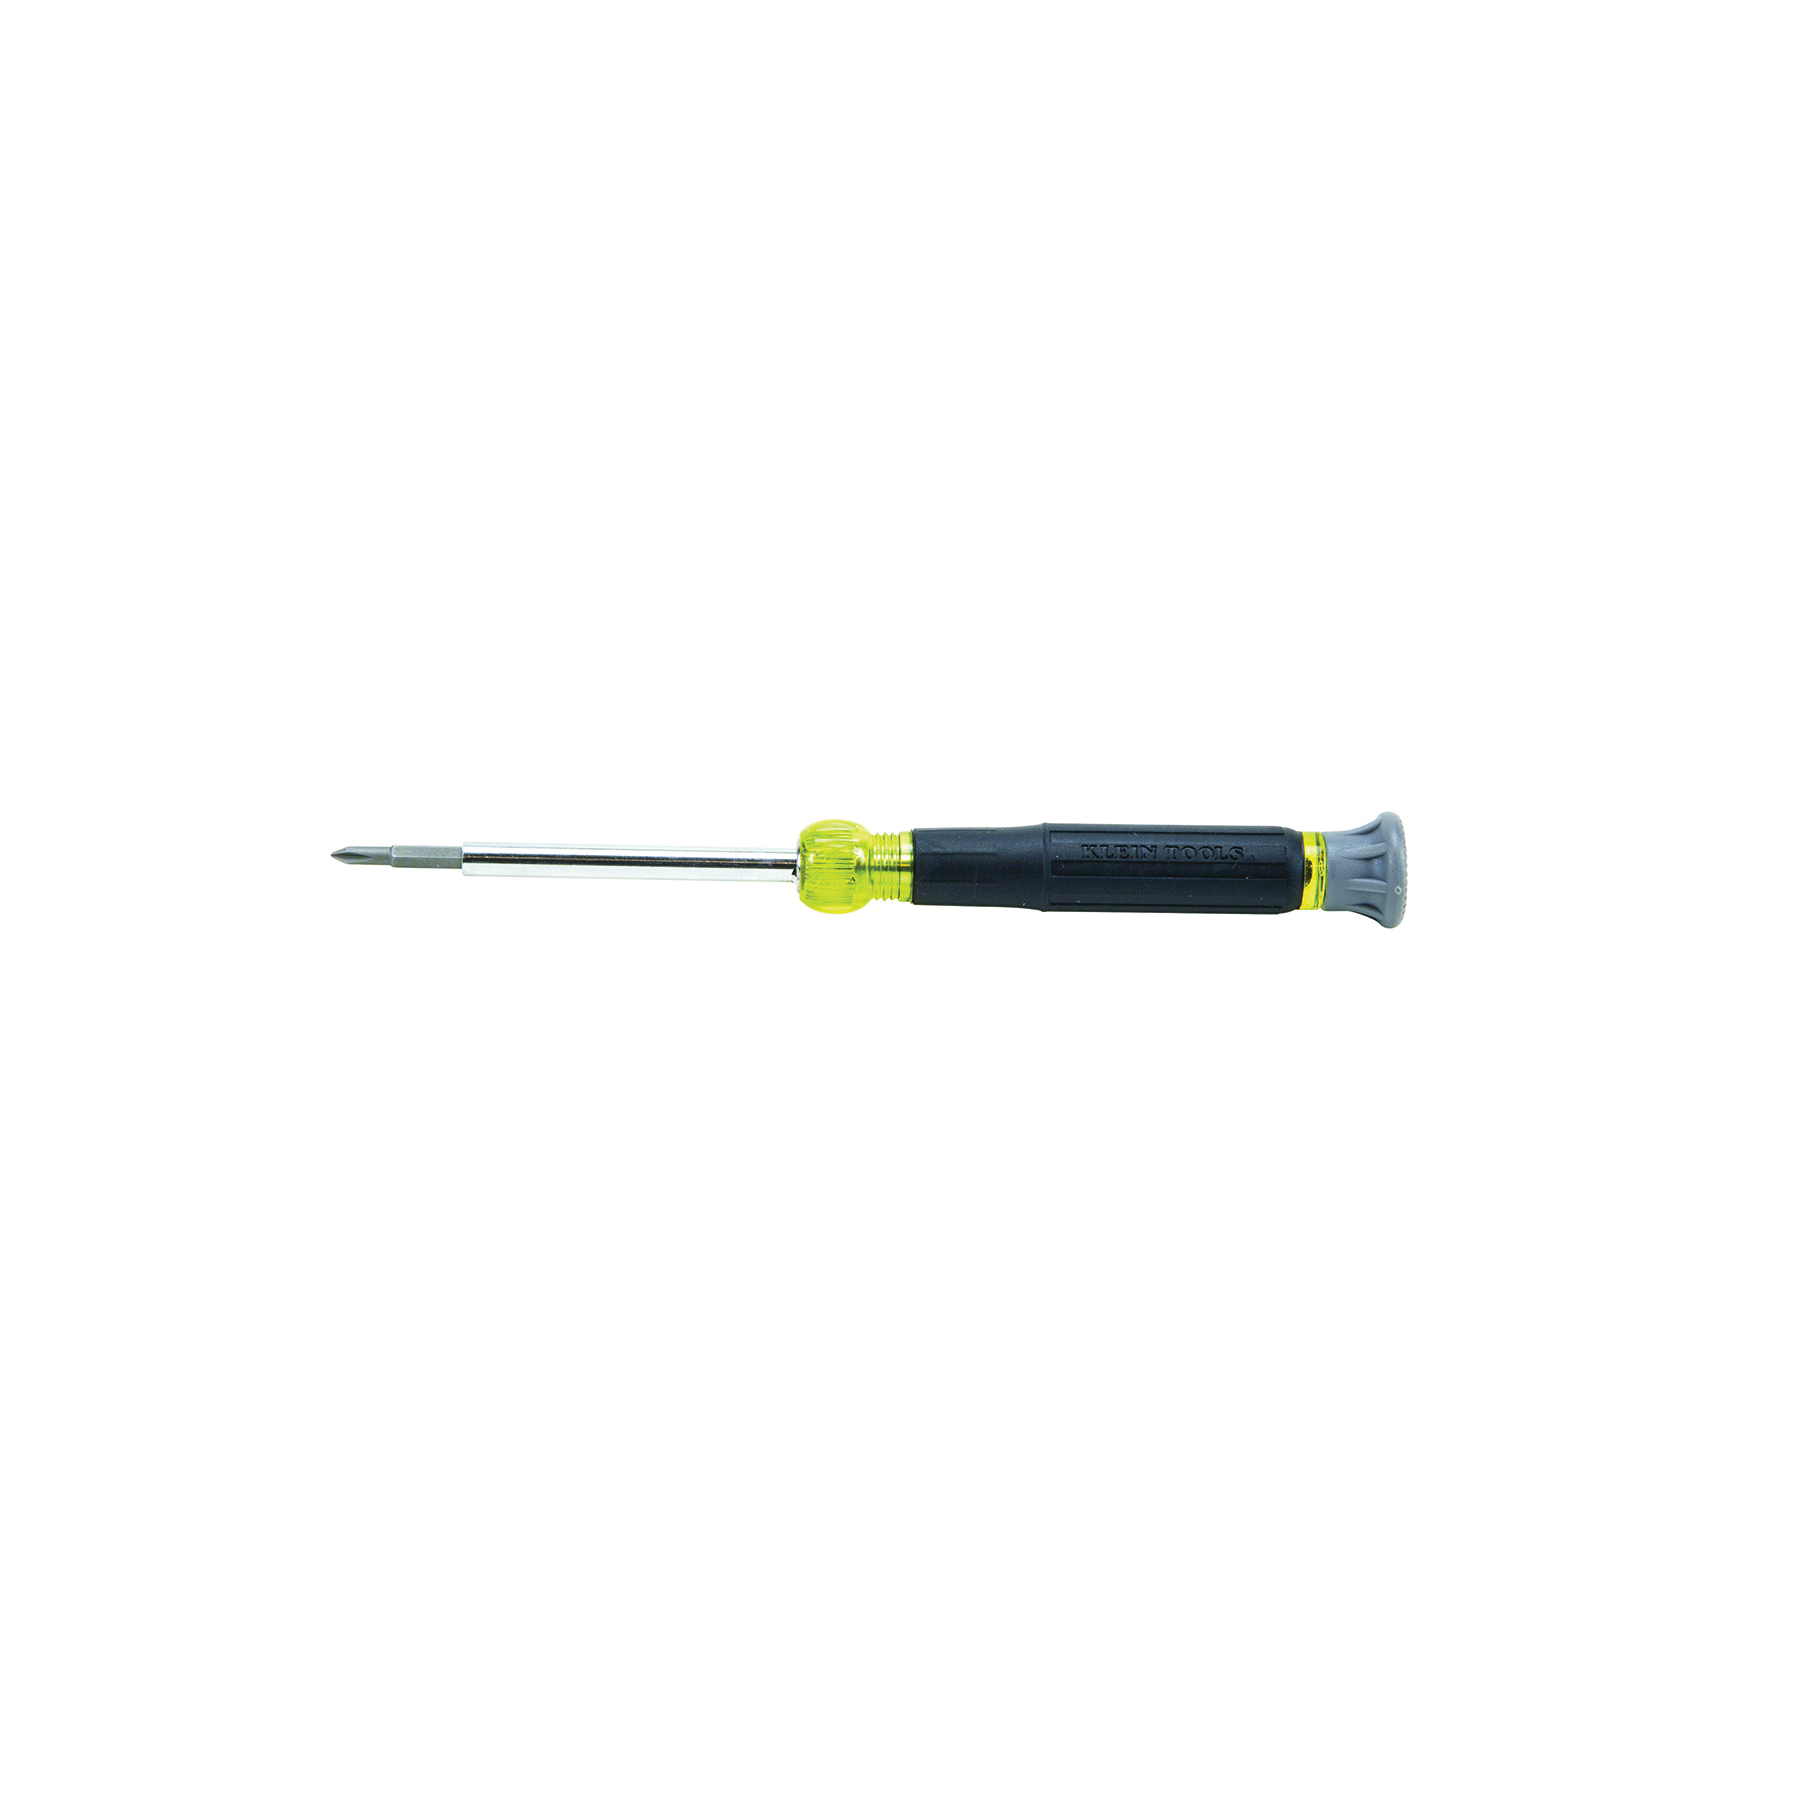 KLEIN TOOLS® 32581 Electronics Screwdriver, Slotted, Phillips Point, 1/8 and 3/32 in Slotted, #0, #00 Phillips Point